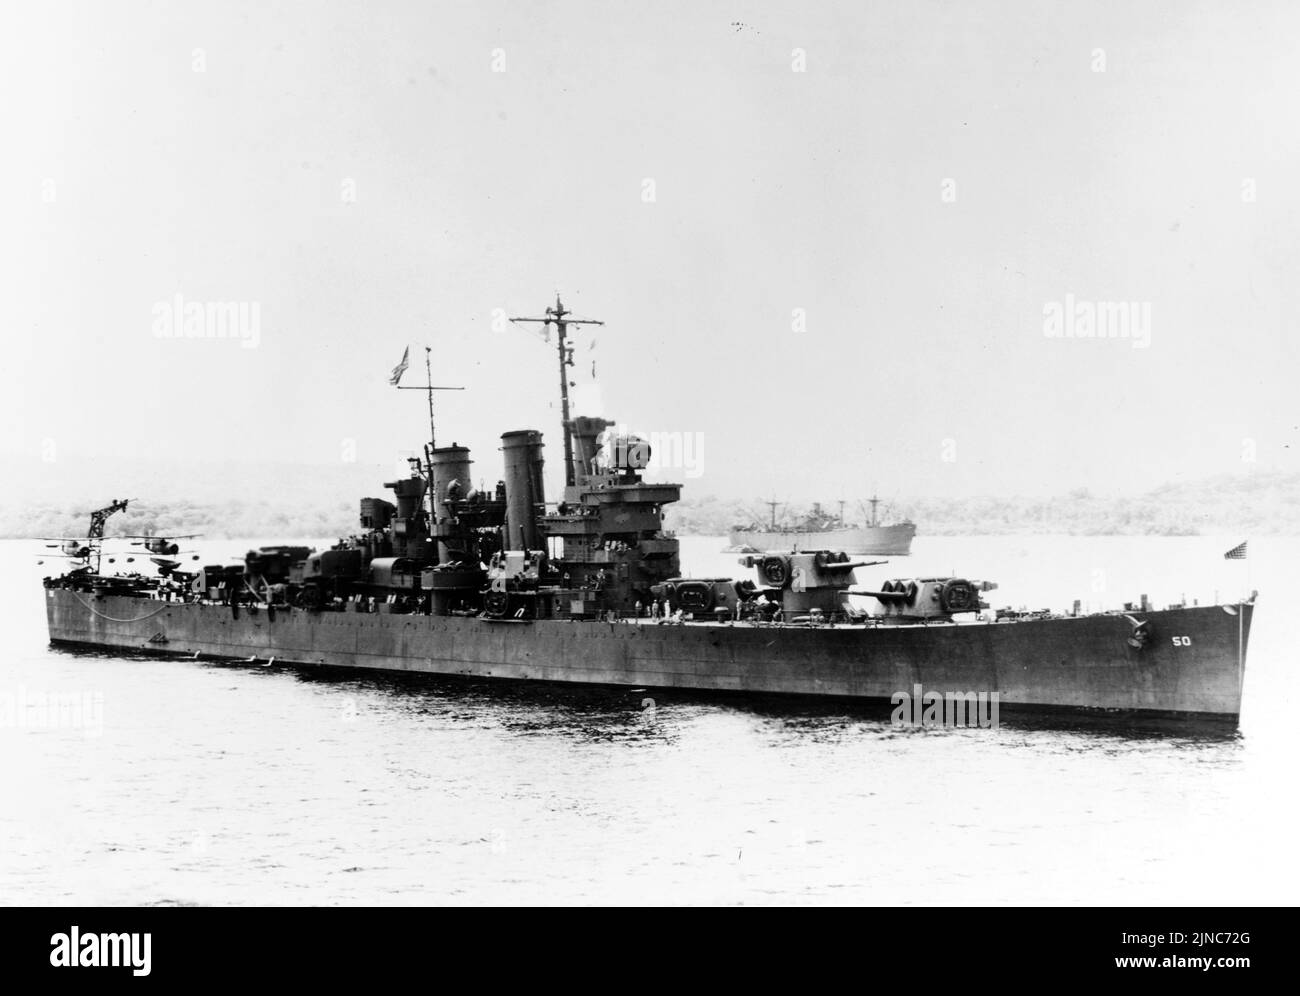 U.S. cruiser Helena, part of Task Force 64 under Norman Scott. Task Force 64 was assembled to protect troops and supplies heading to Guadalcanal in WW2 Stock Photo